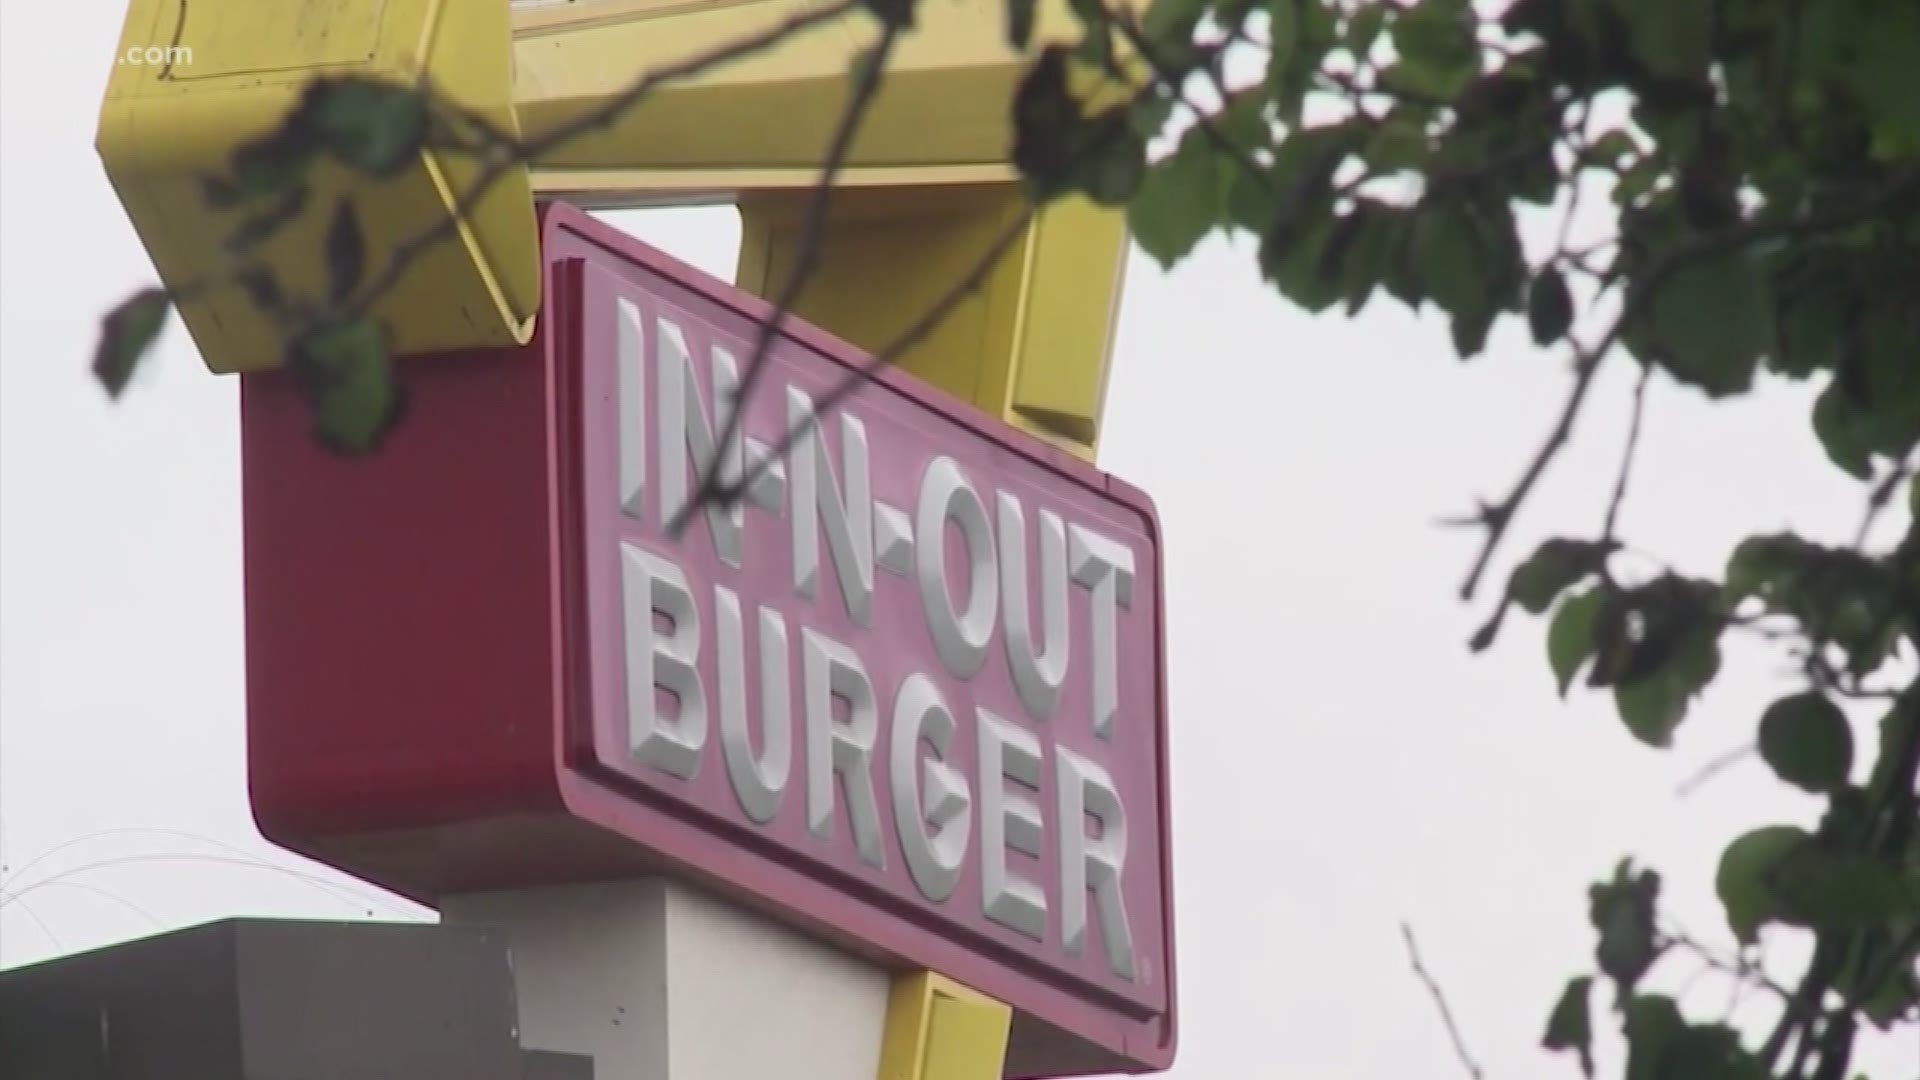 In-N-Out in Stafford finally has an opening date, and it's this Friday!